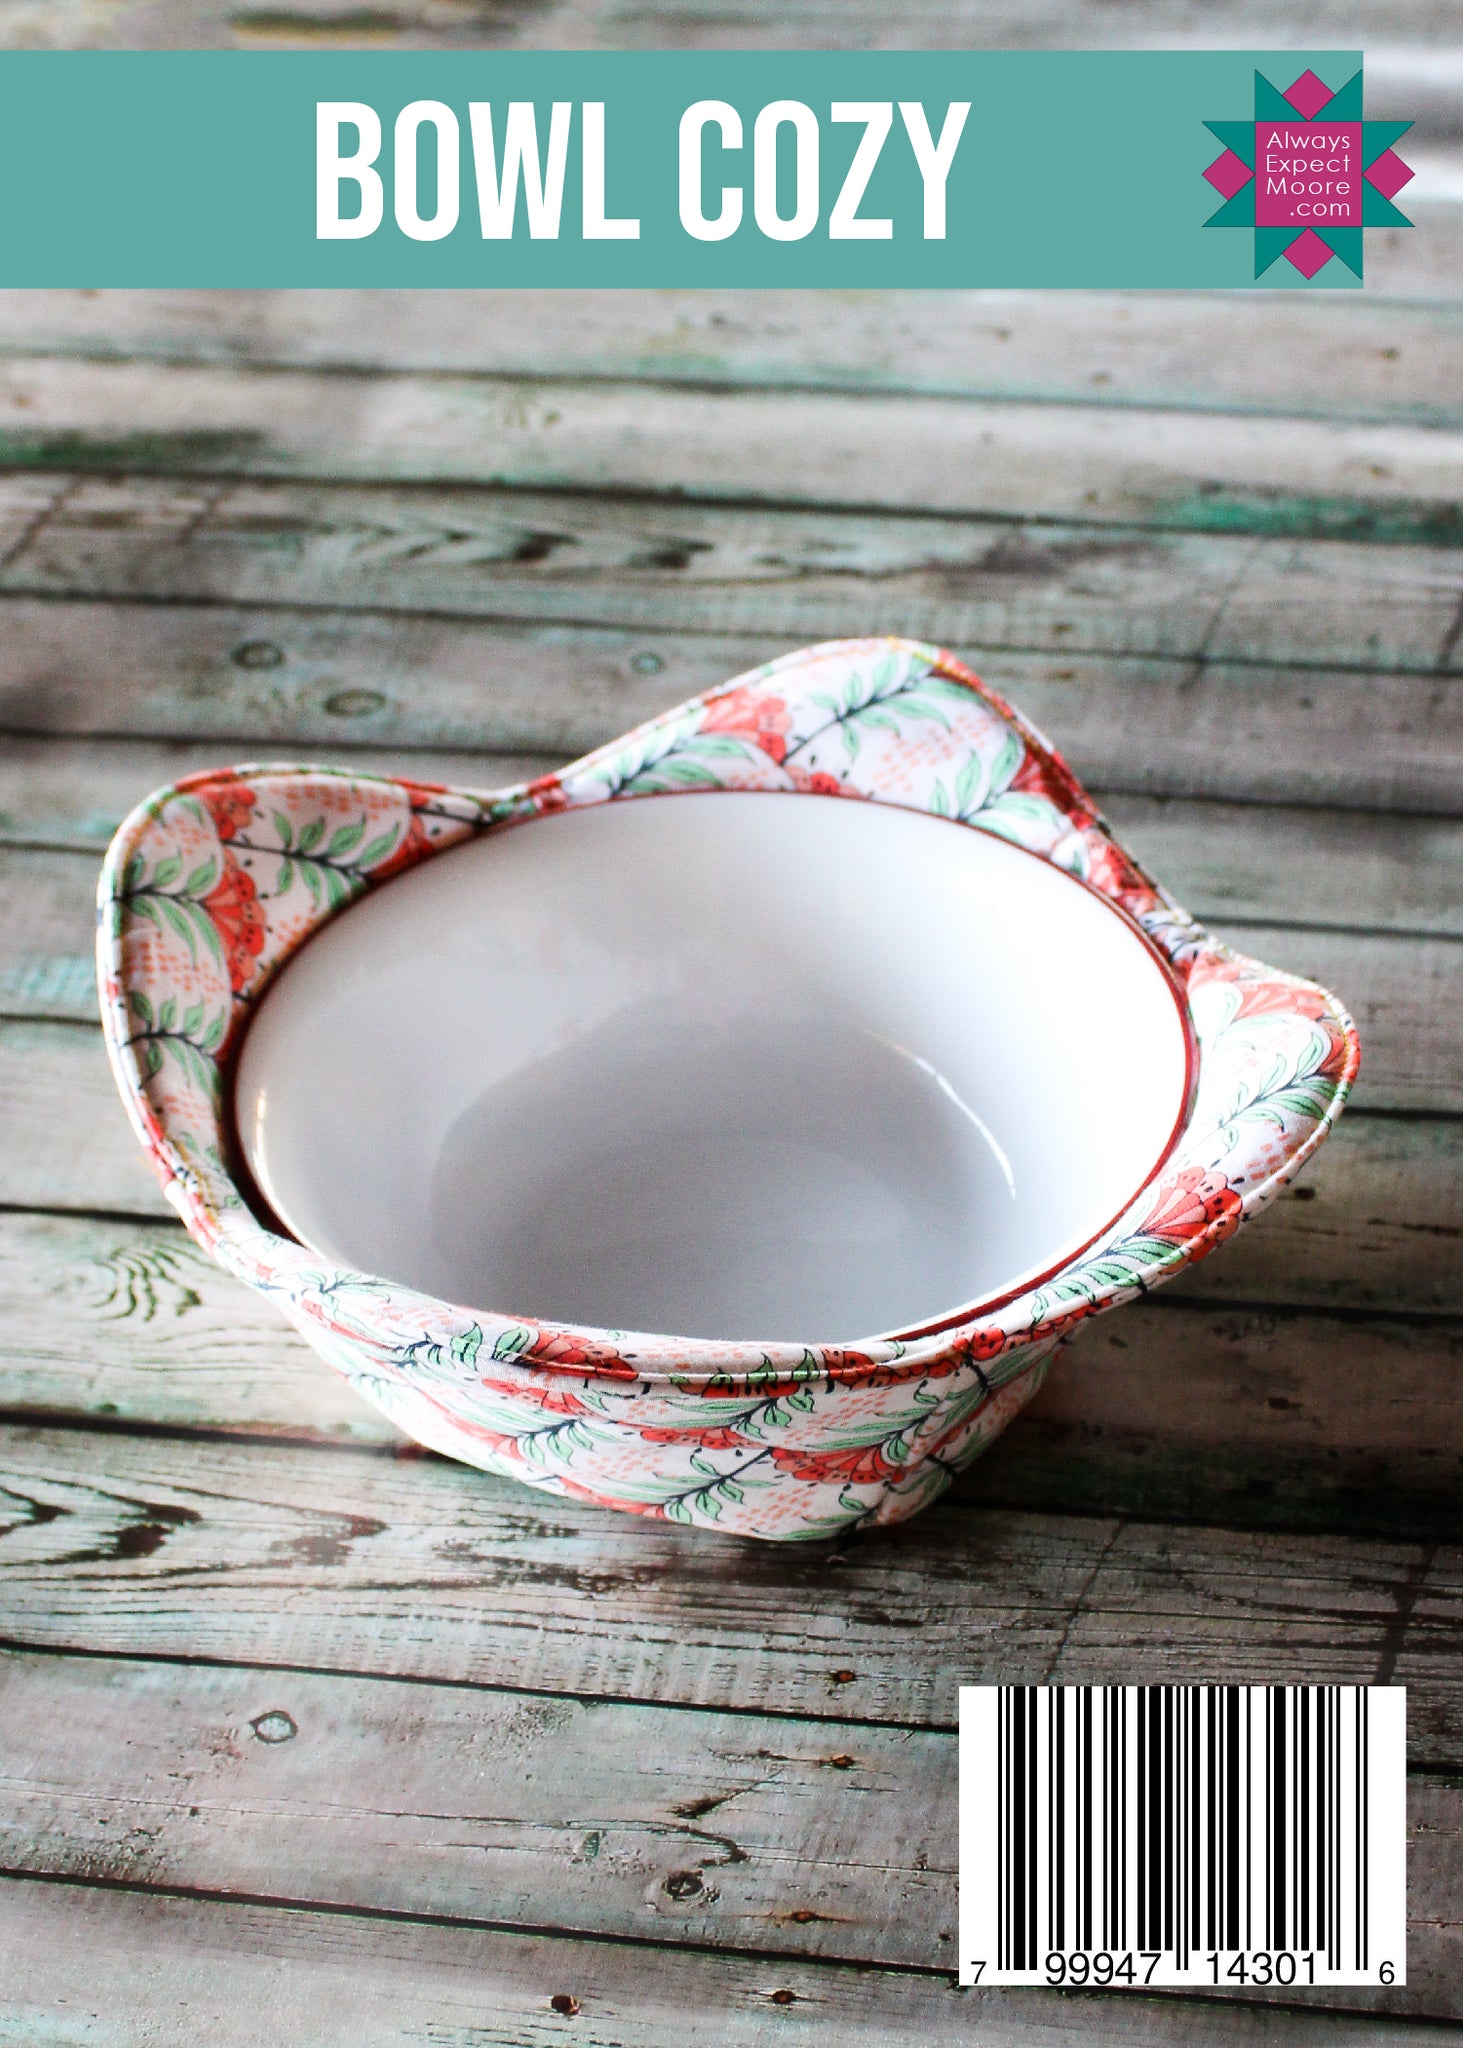 Bowl Cozy Sewing Pattern  Sewing projects for beginners, Small